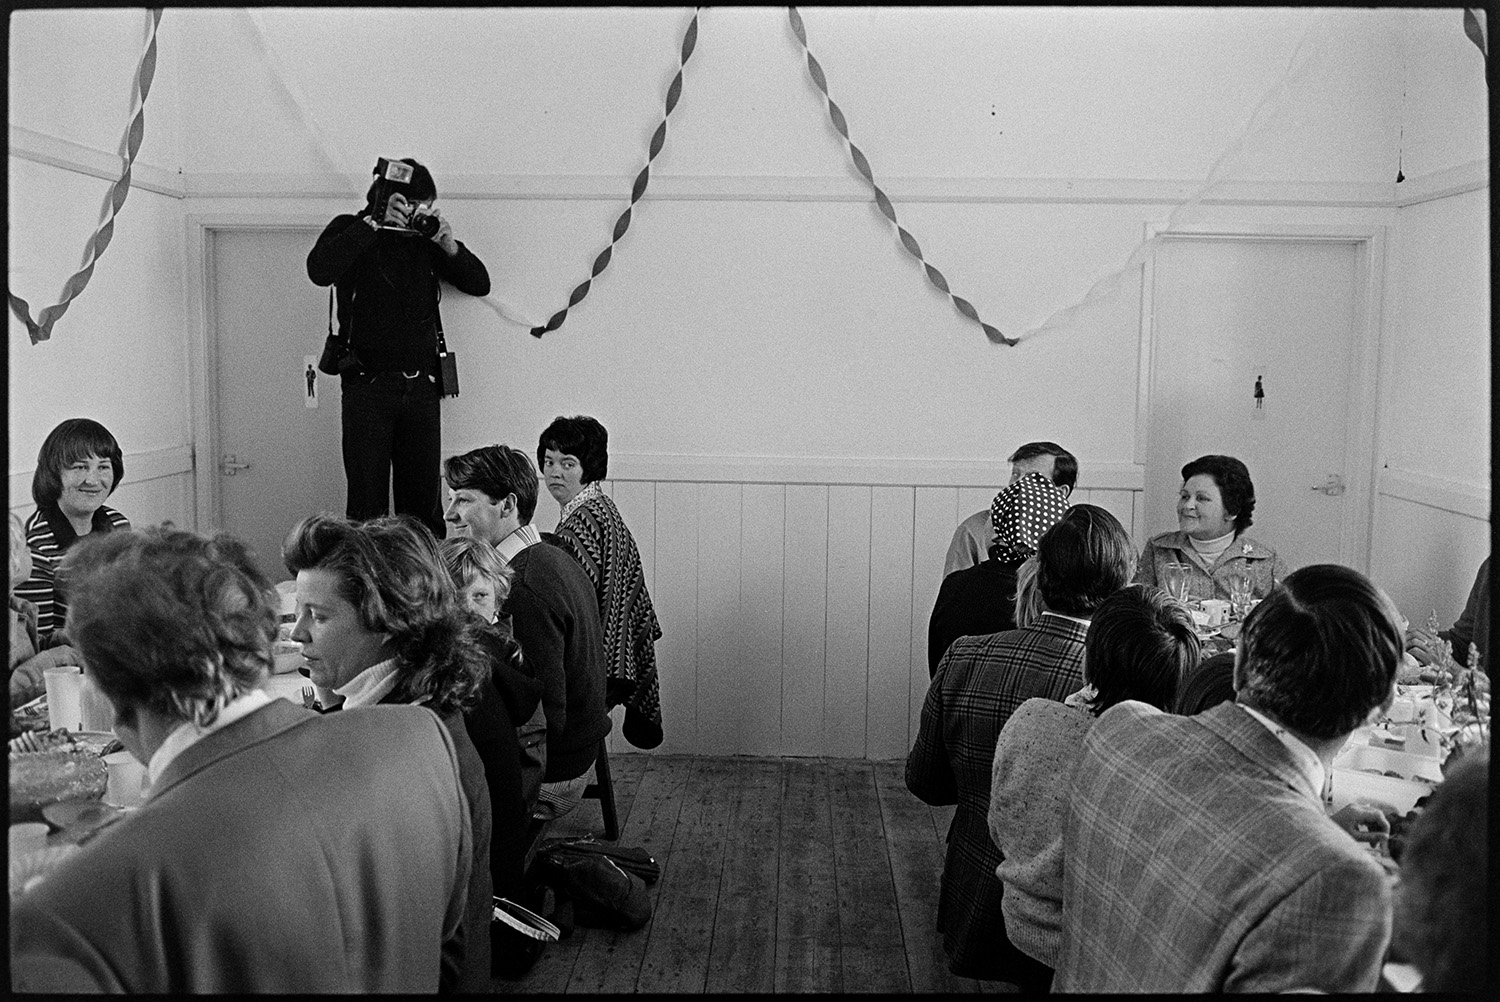 Jubilee lunch in village hall people serving food and eating. 
[A person taking a photograph of people eating lunch in Atherington Village Hall to celebrate Queen Elizabeth II Silver Jubilee day. The hall is decorated with streamers.]